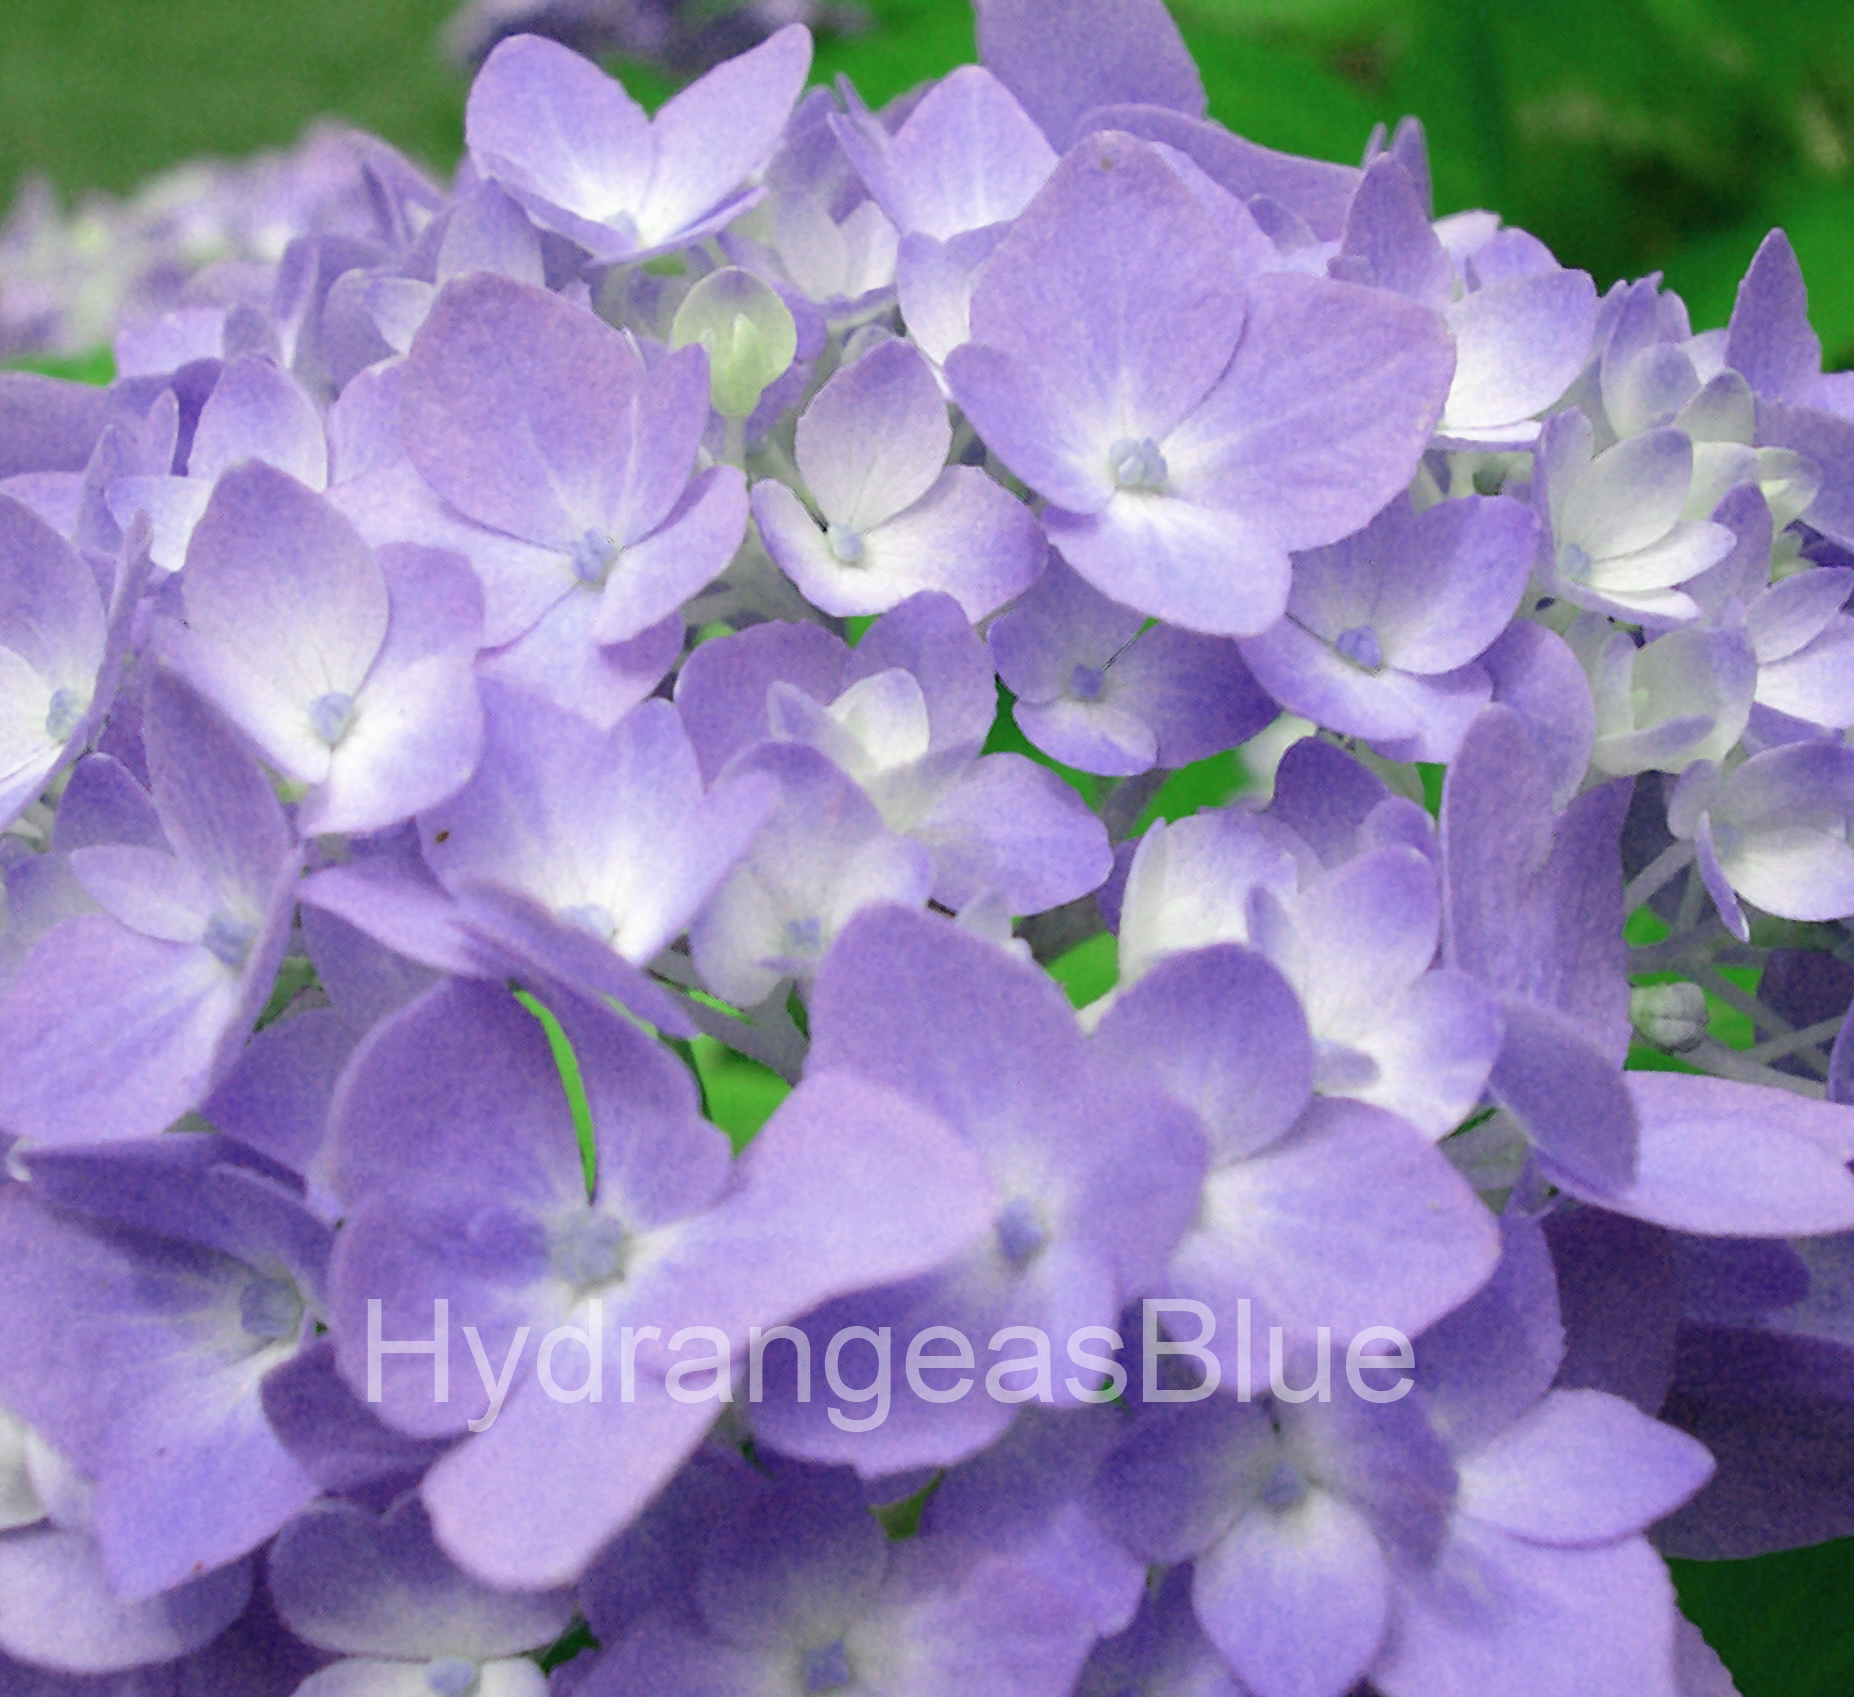 Bloomstruck is the New Purple Hydrangea For 2014